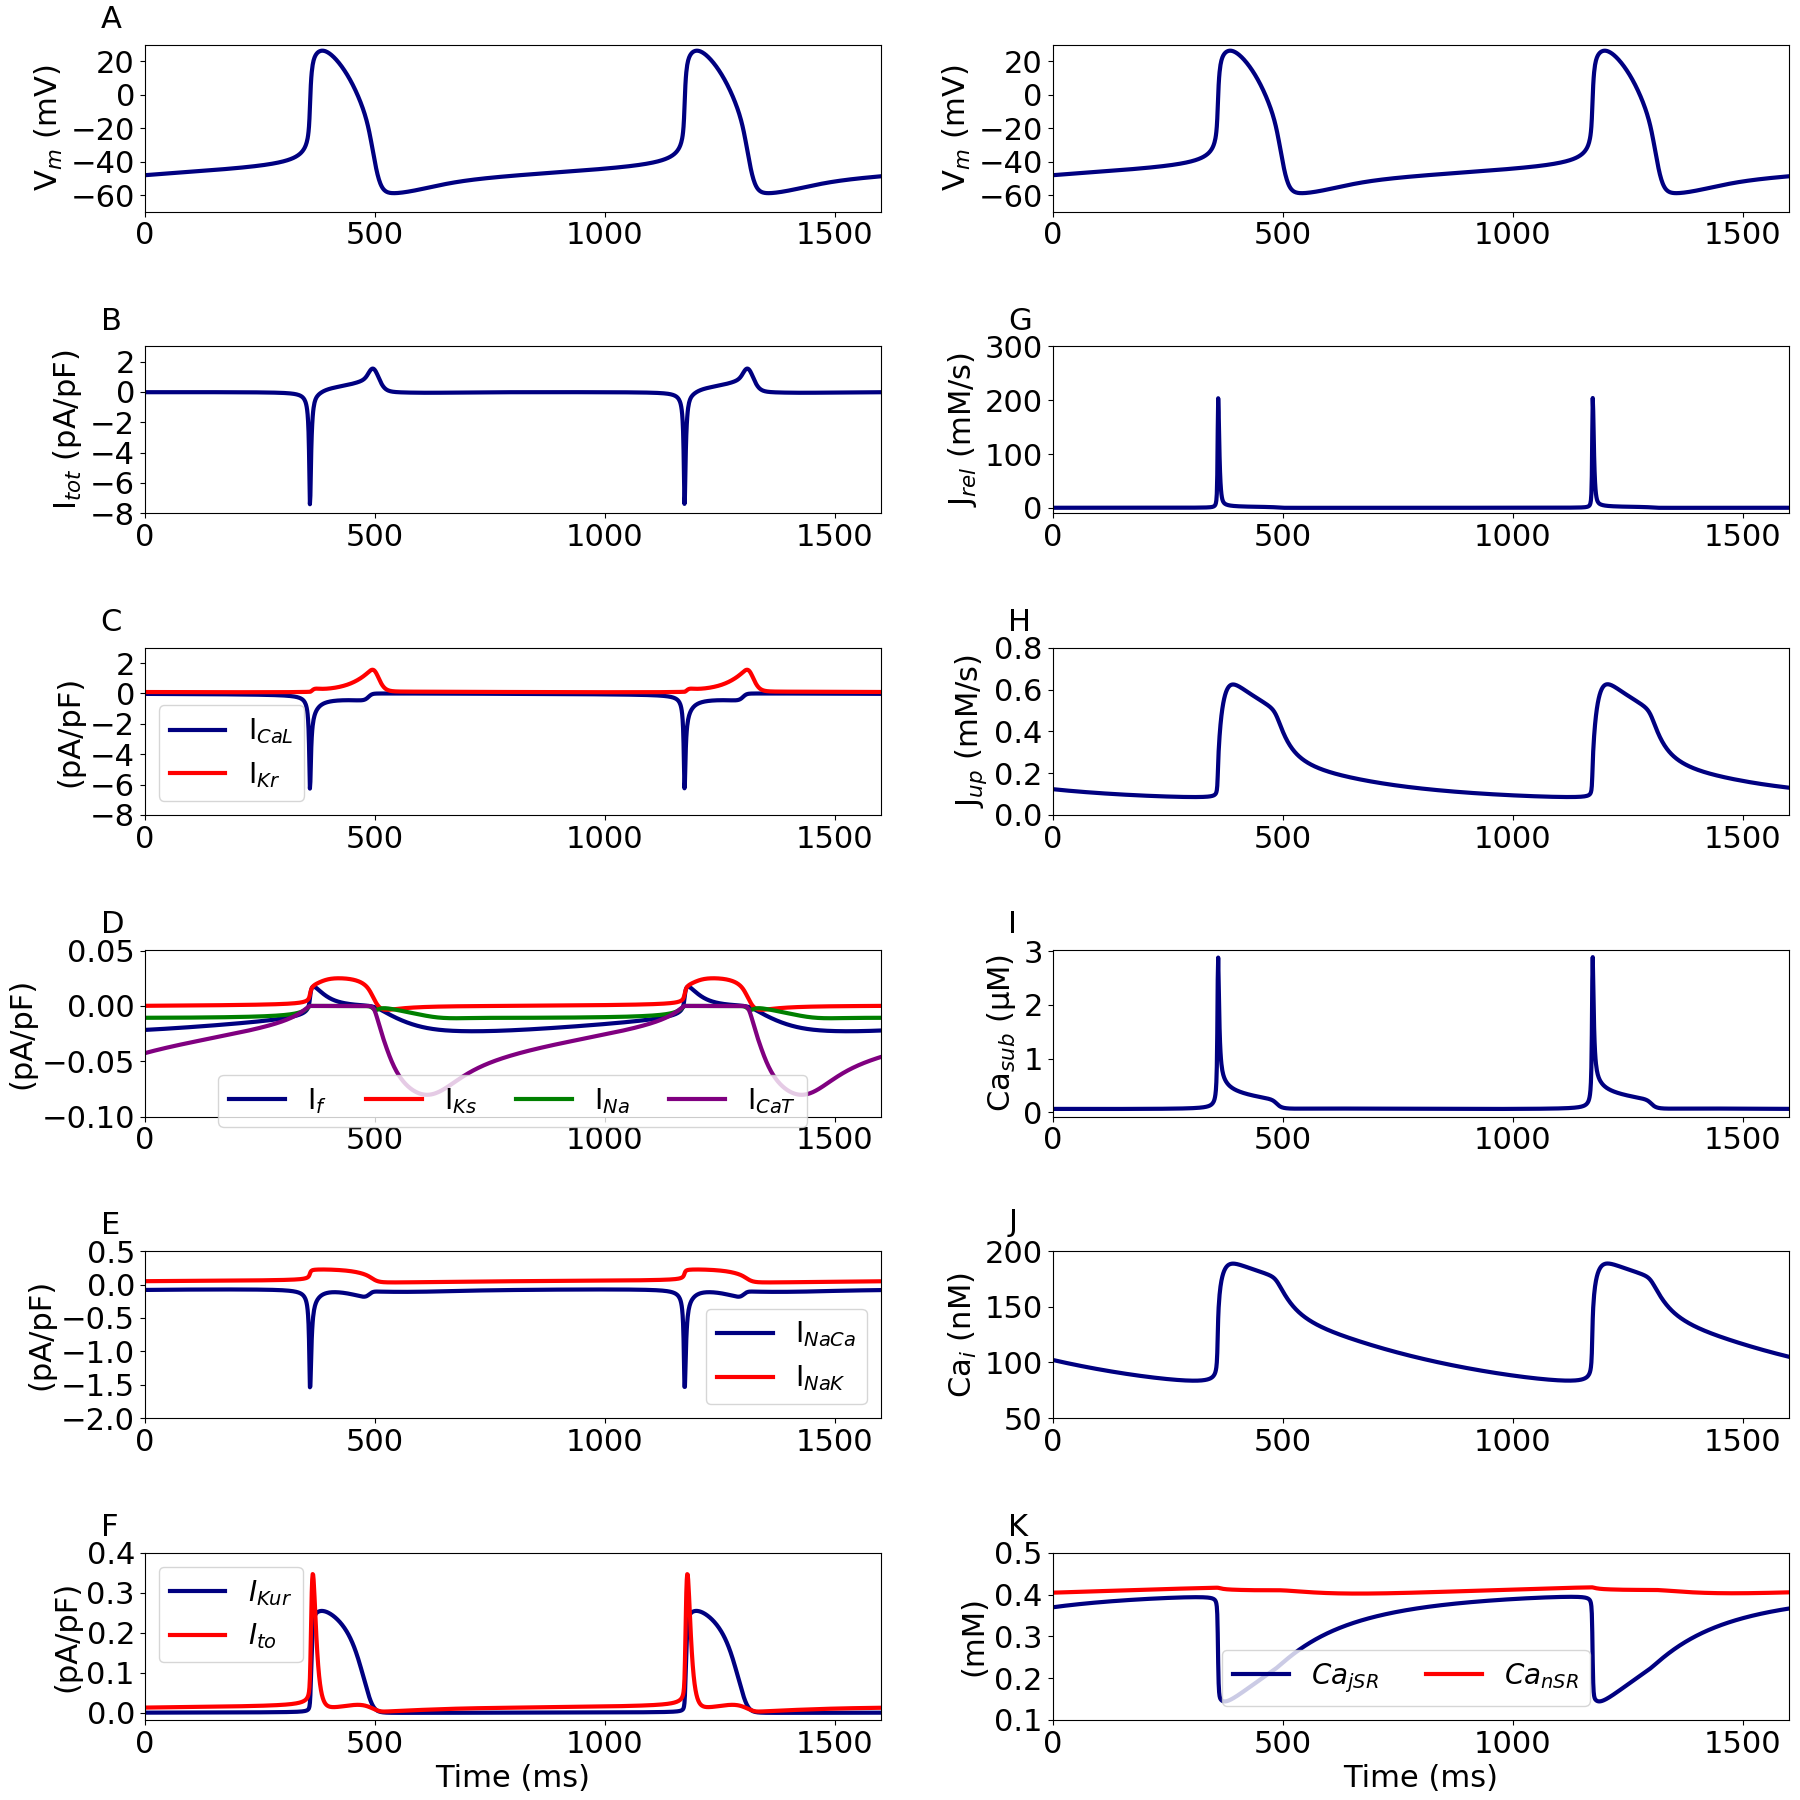 Time course of the simulated action potential and its underlying ionic currents.